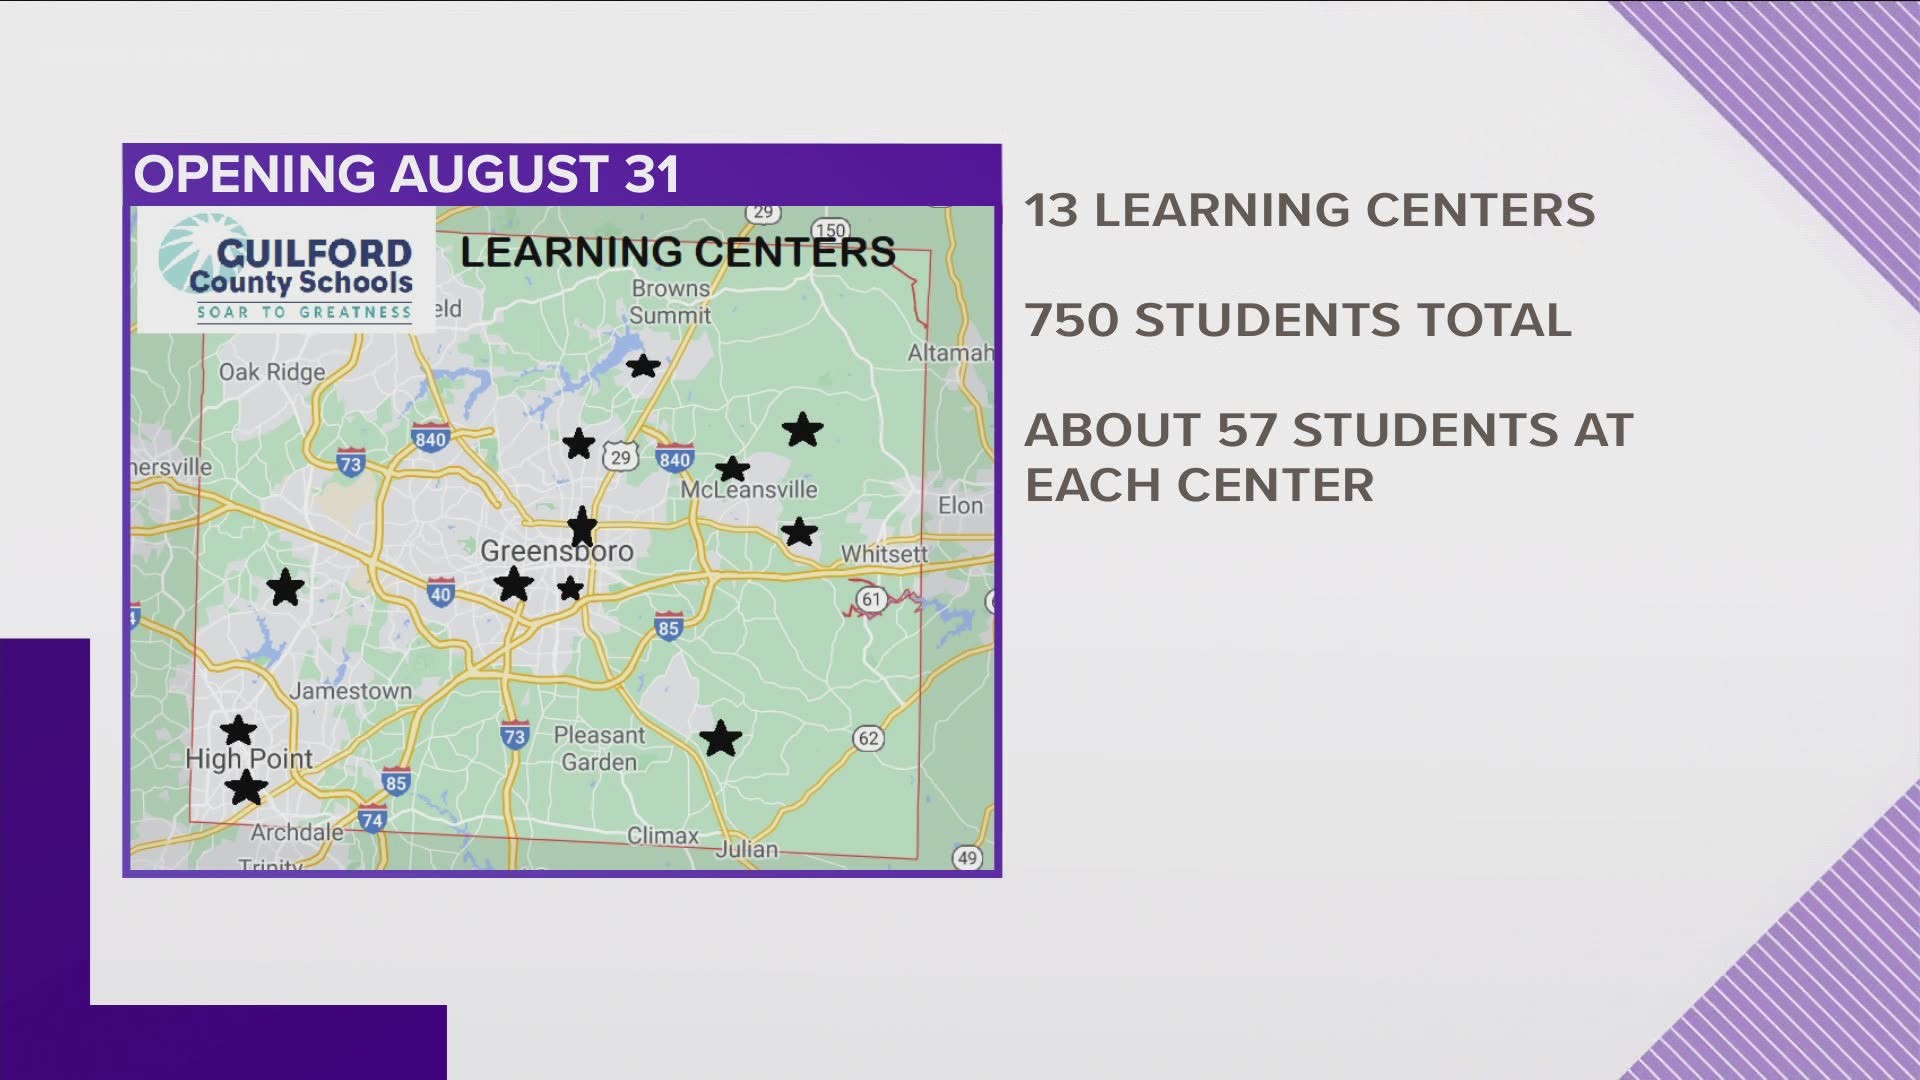 2WTK looks at the learning centers and how they will work.